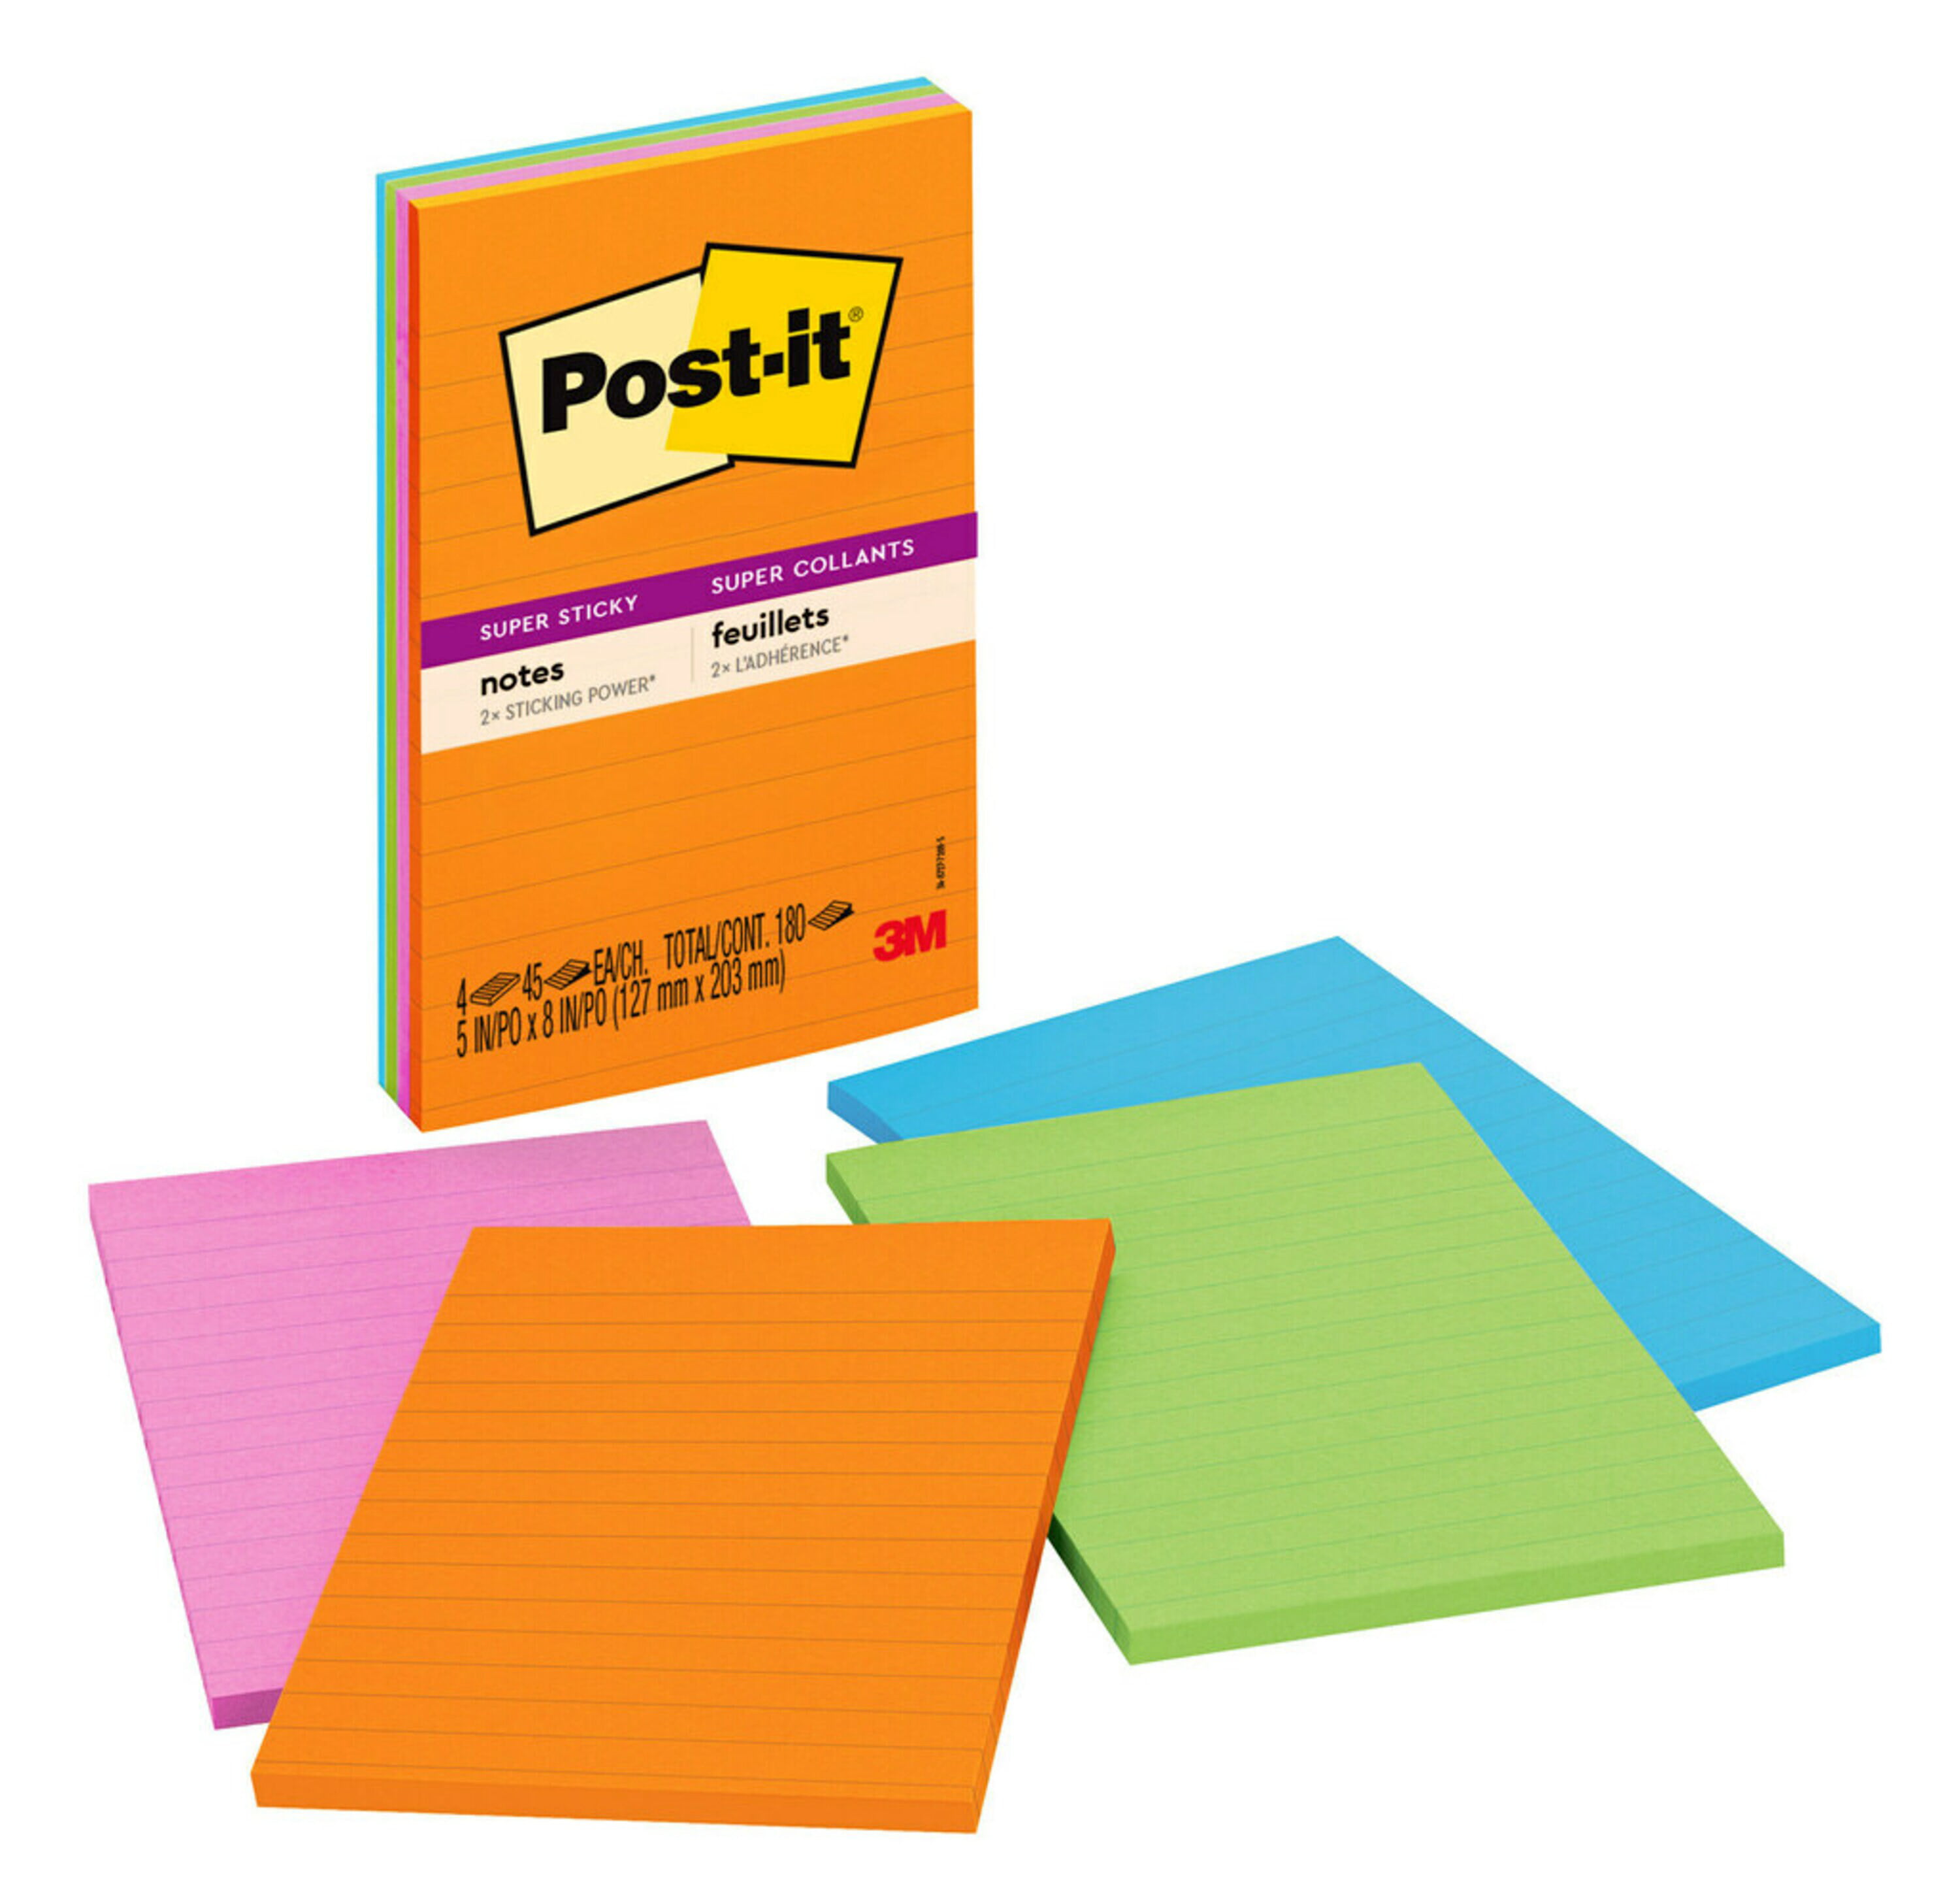 Post-it Notes Super Sticky Pads, Rio De Janeiro Colors, 5 X 8, Lined, 45/Pad, 4 Pads/Pack